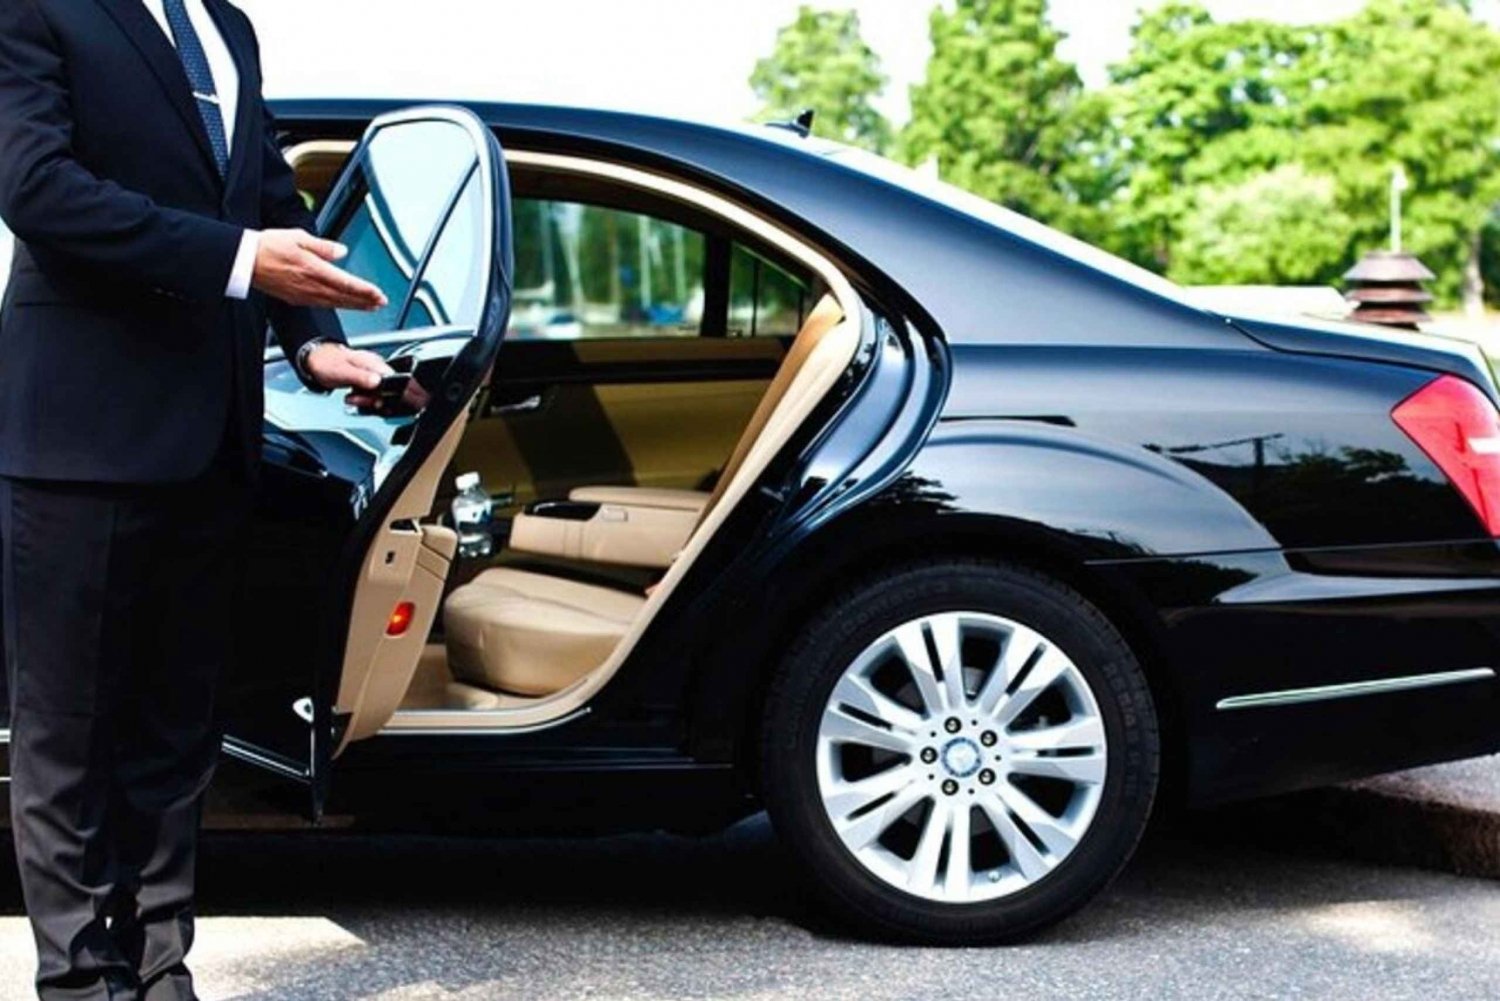 Malta Airport: Private Hotel Transfer from Airport